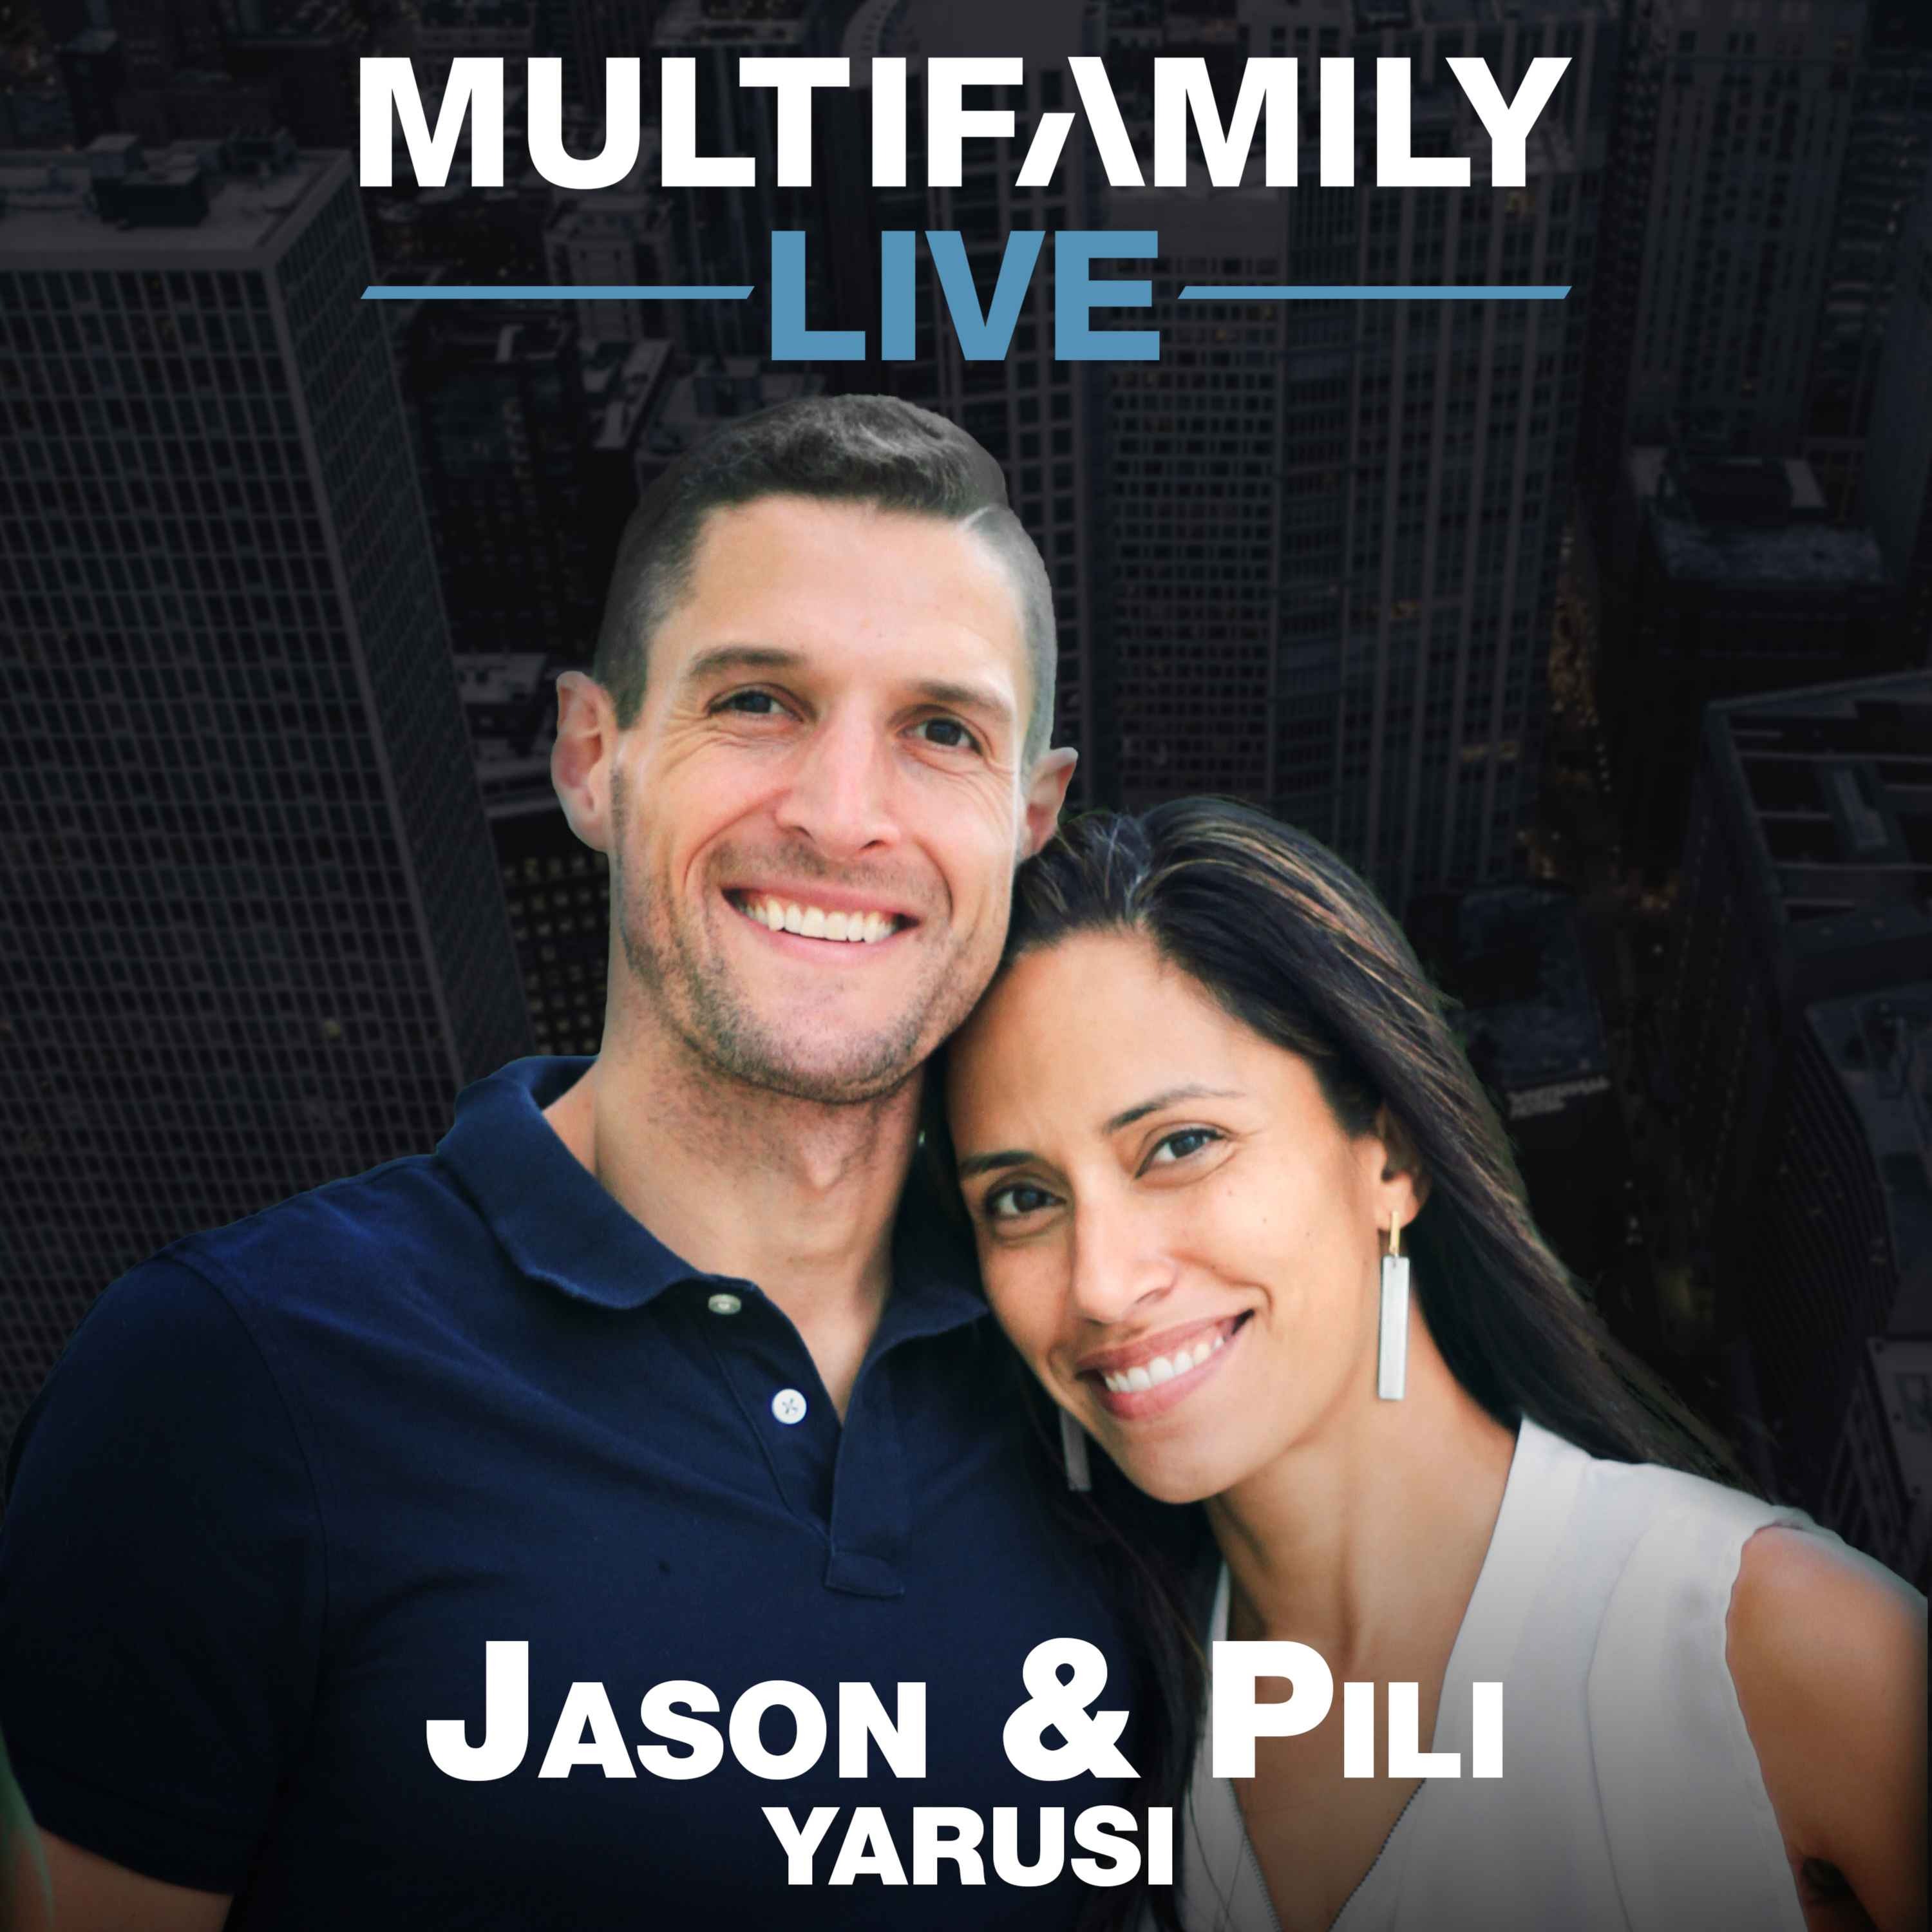 Life Prepared Me for Multifamily (With Alix Kogan)